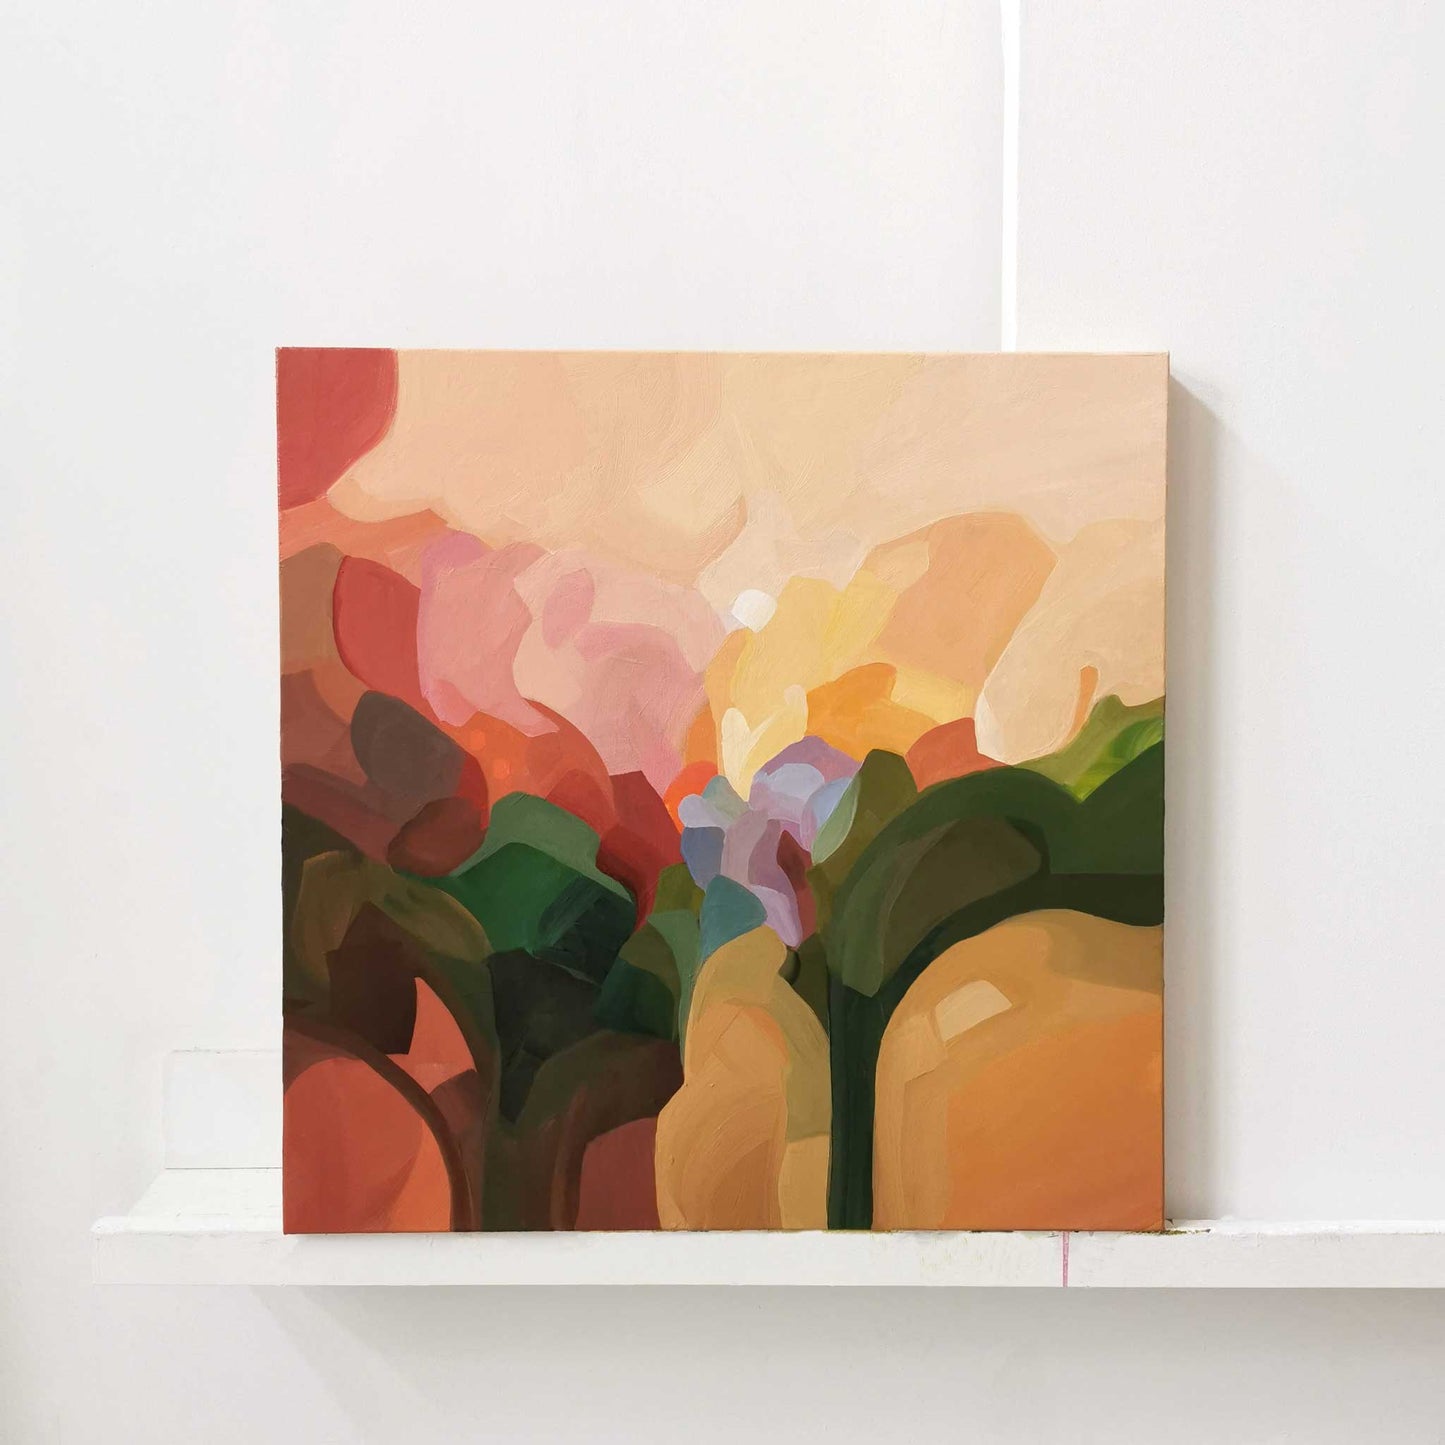 acrylic abstract painting in peach and coral color by Canadian abstract artist Susannah Bleasby